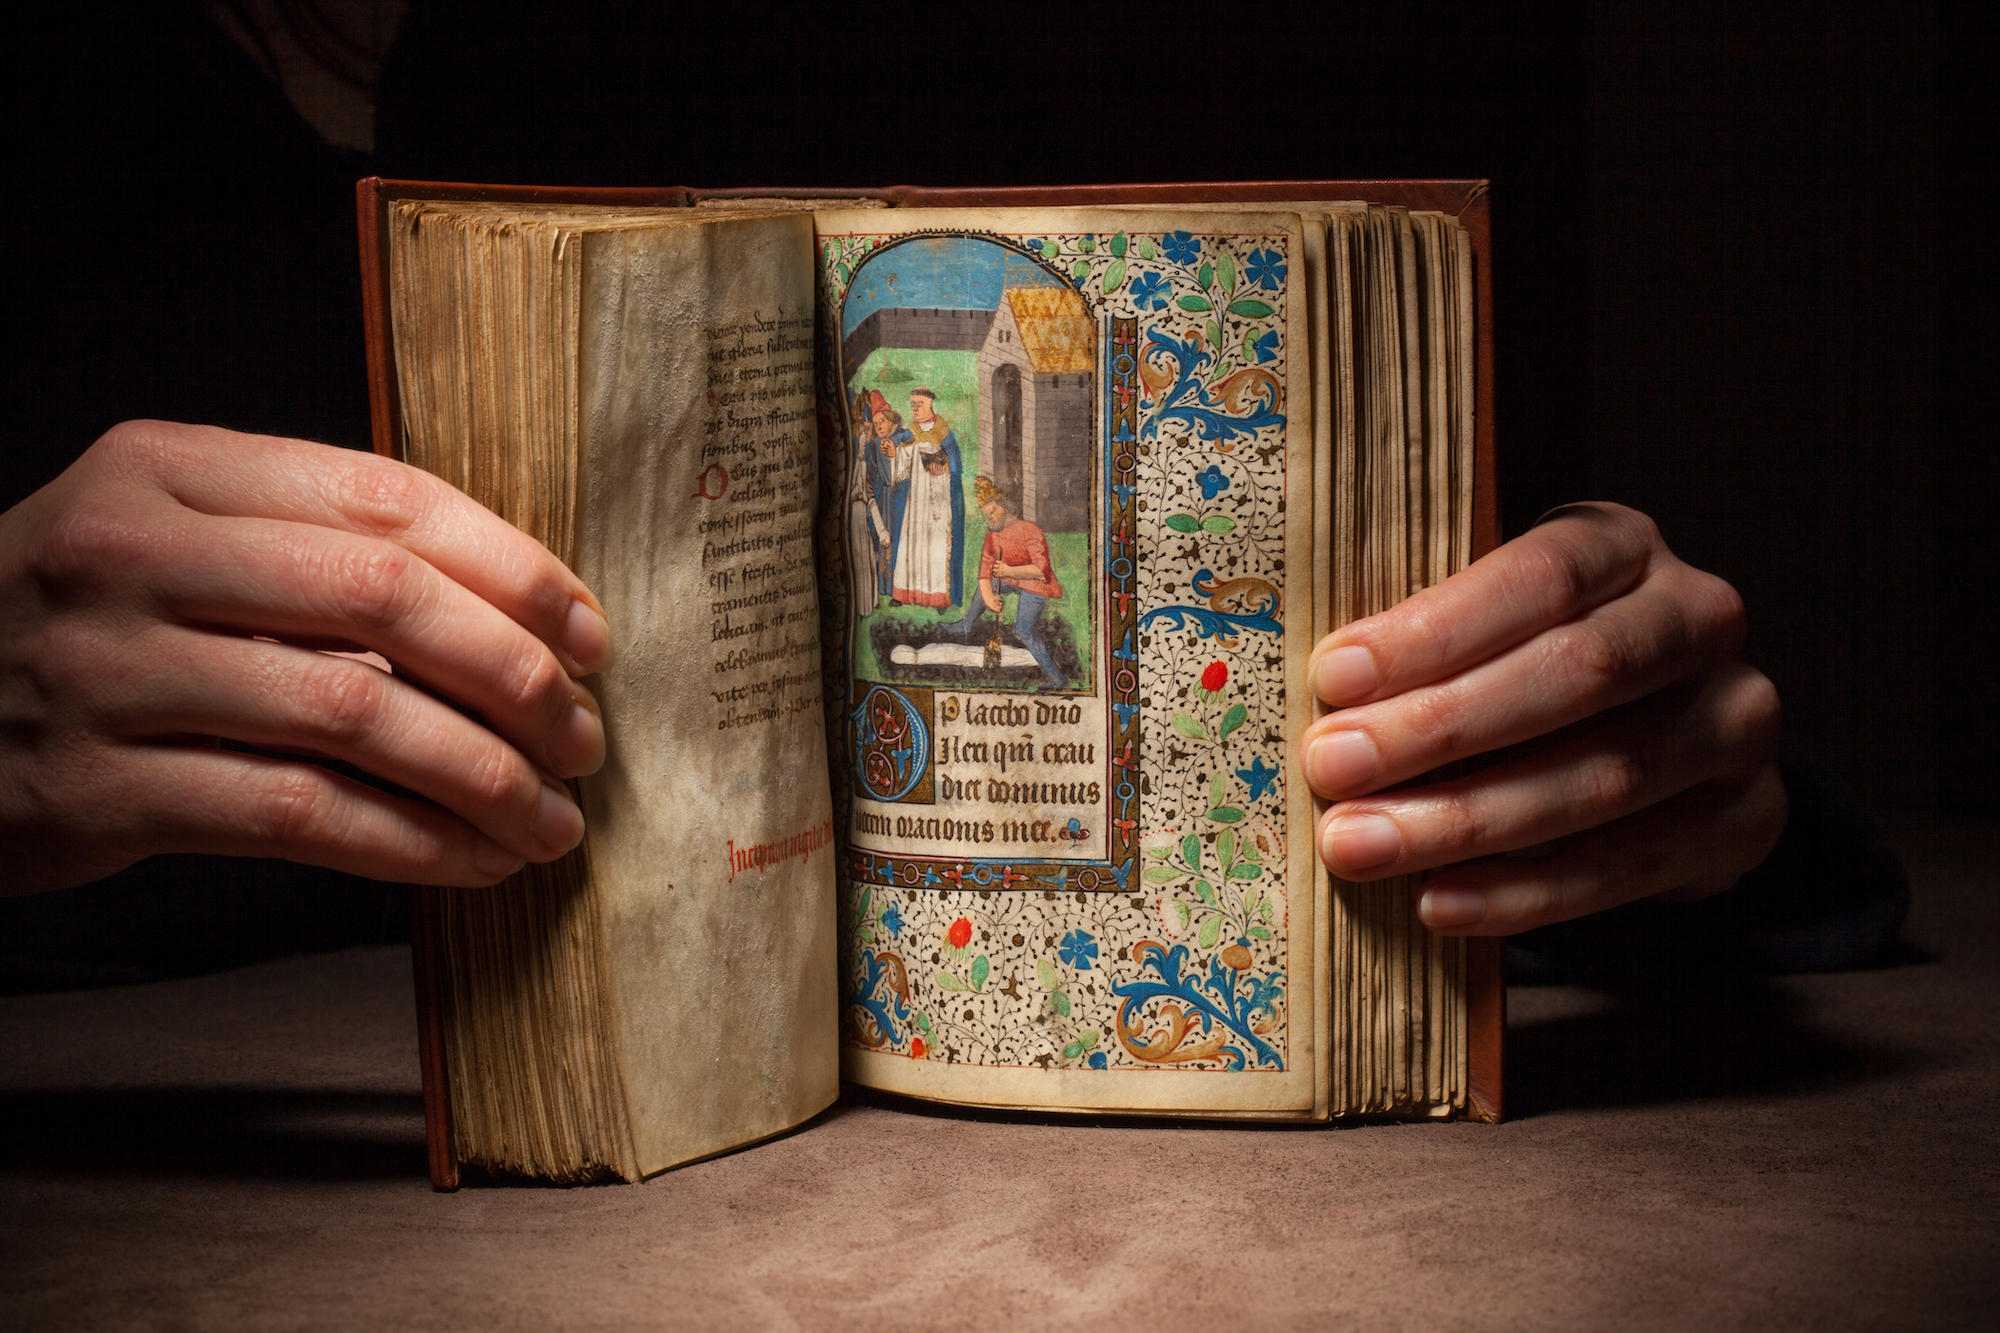 Hands holding open a medieval book of your to a page with illustration of a burial.